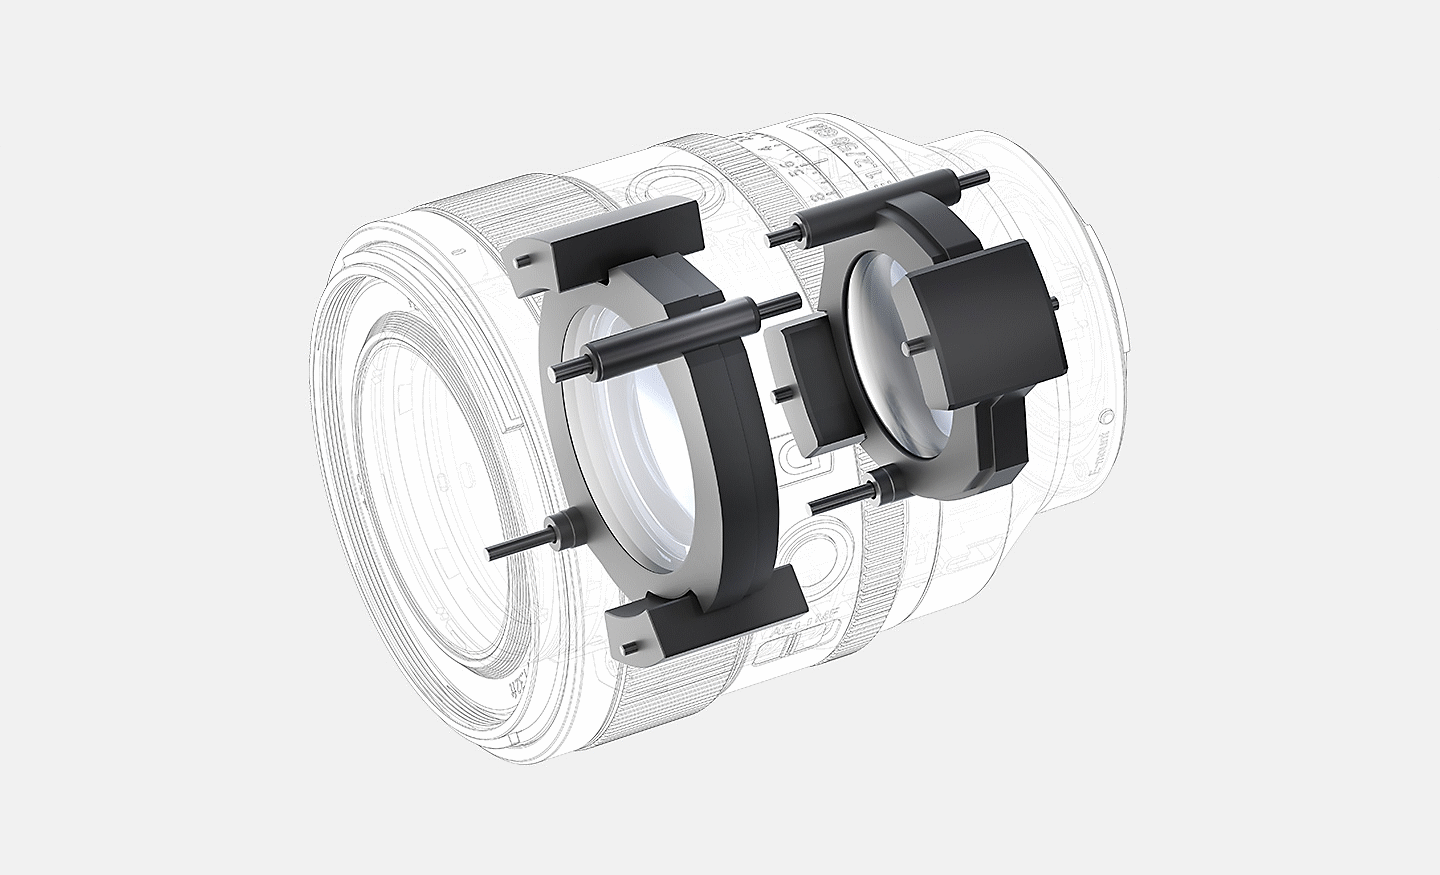 Image of the XD Linear Motor actuators in the lens